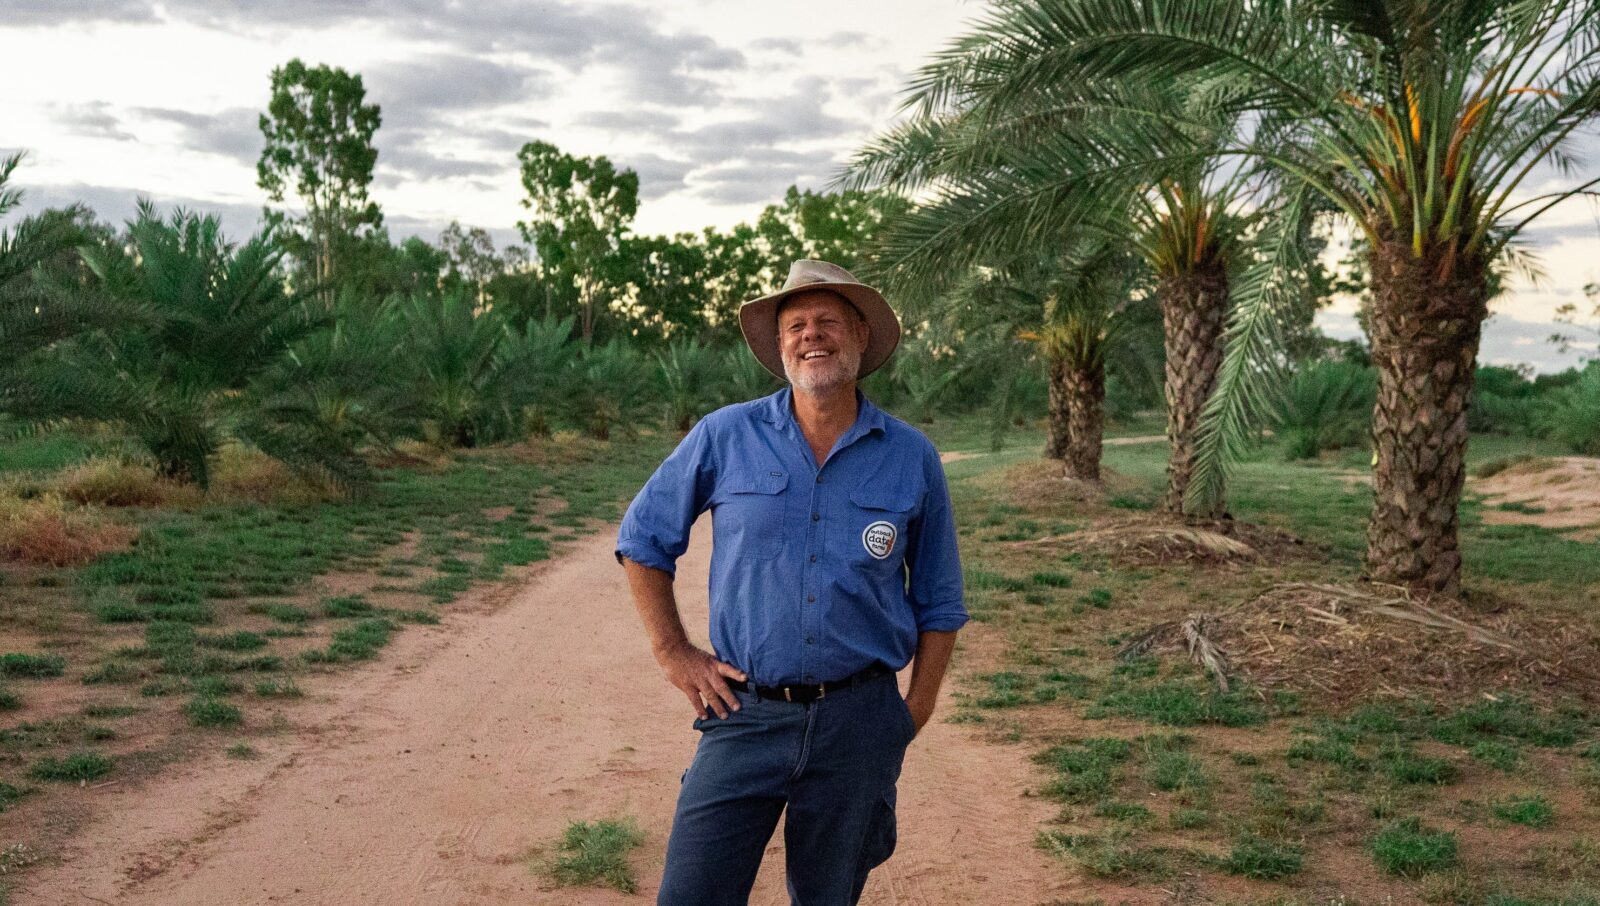 Outback Date Farms owner and tour guide standing between rows of palm trees